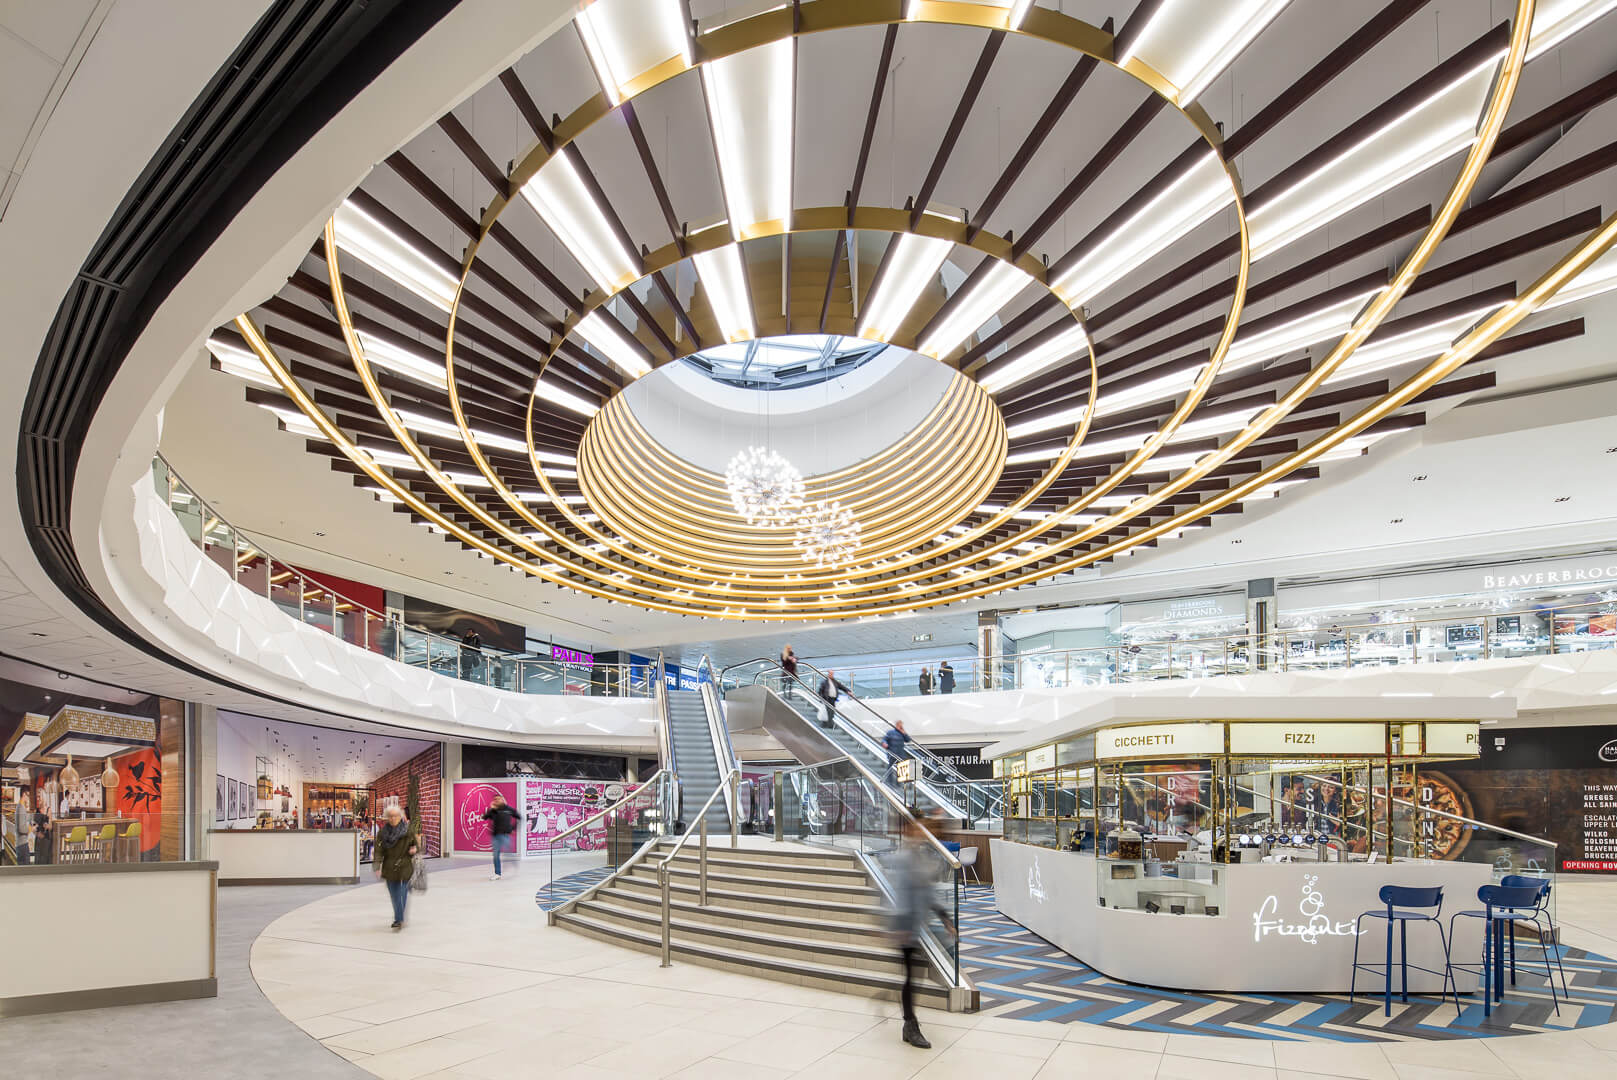 Commercial architecture, interior & aerial photography - Halle Place, Manchester Arndale